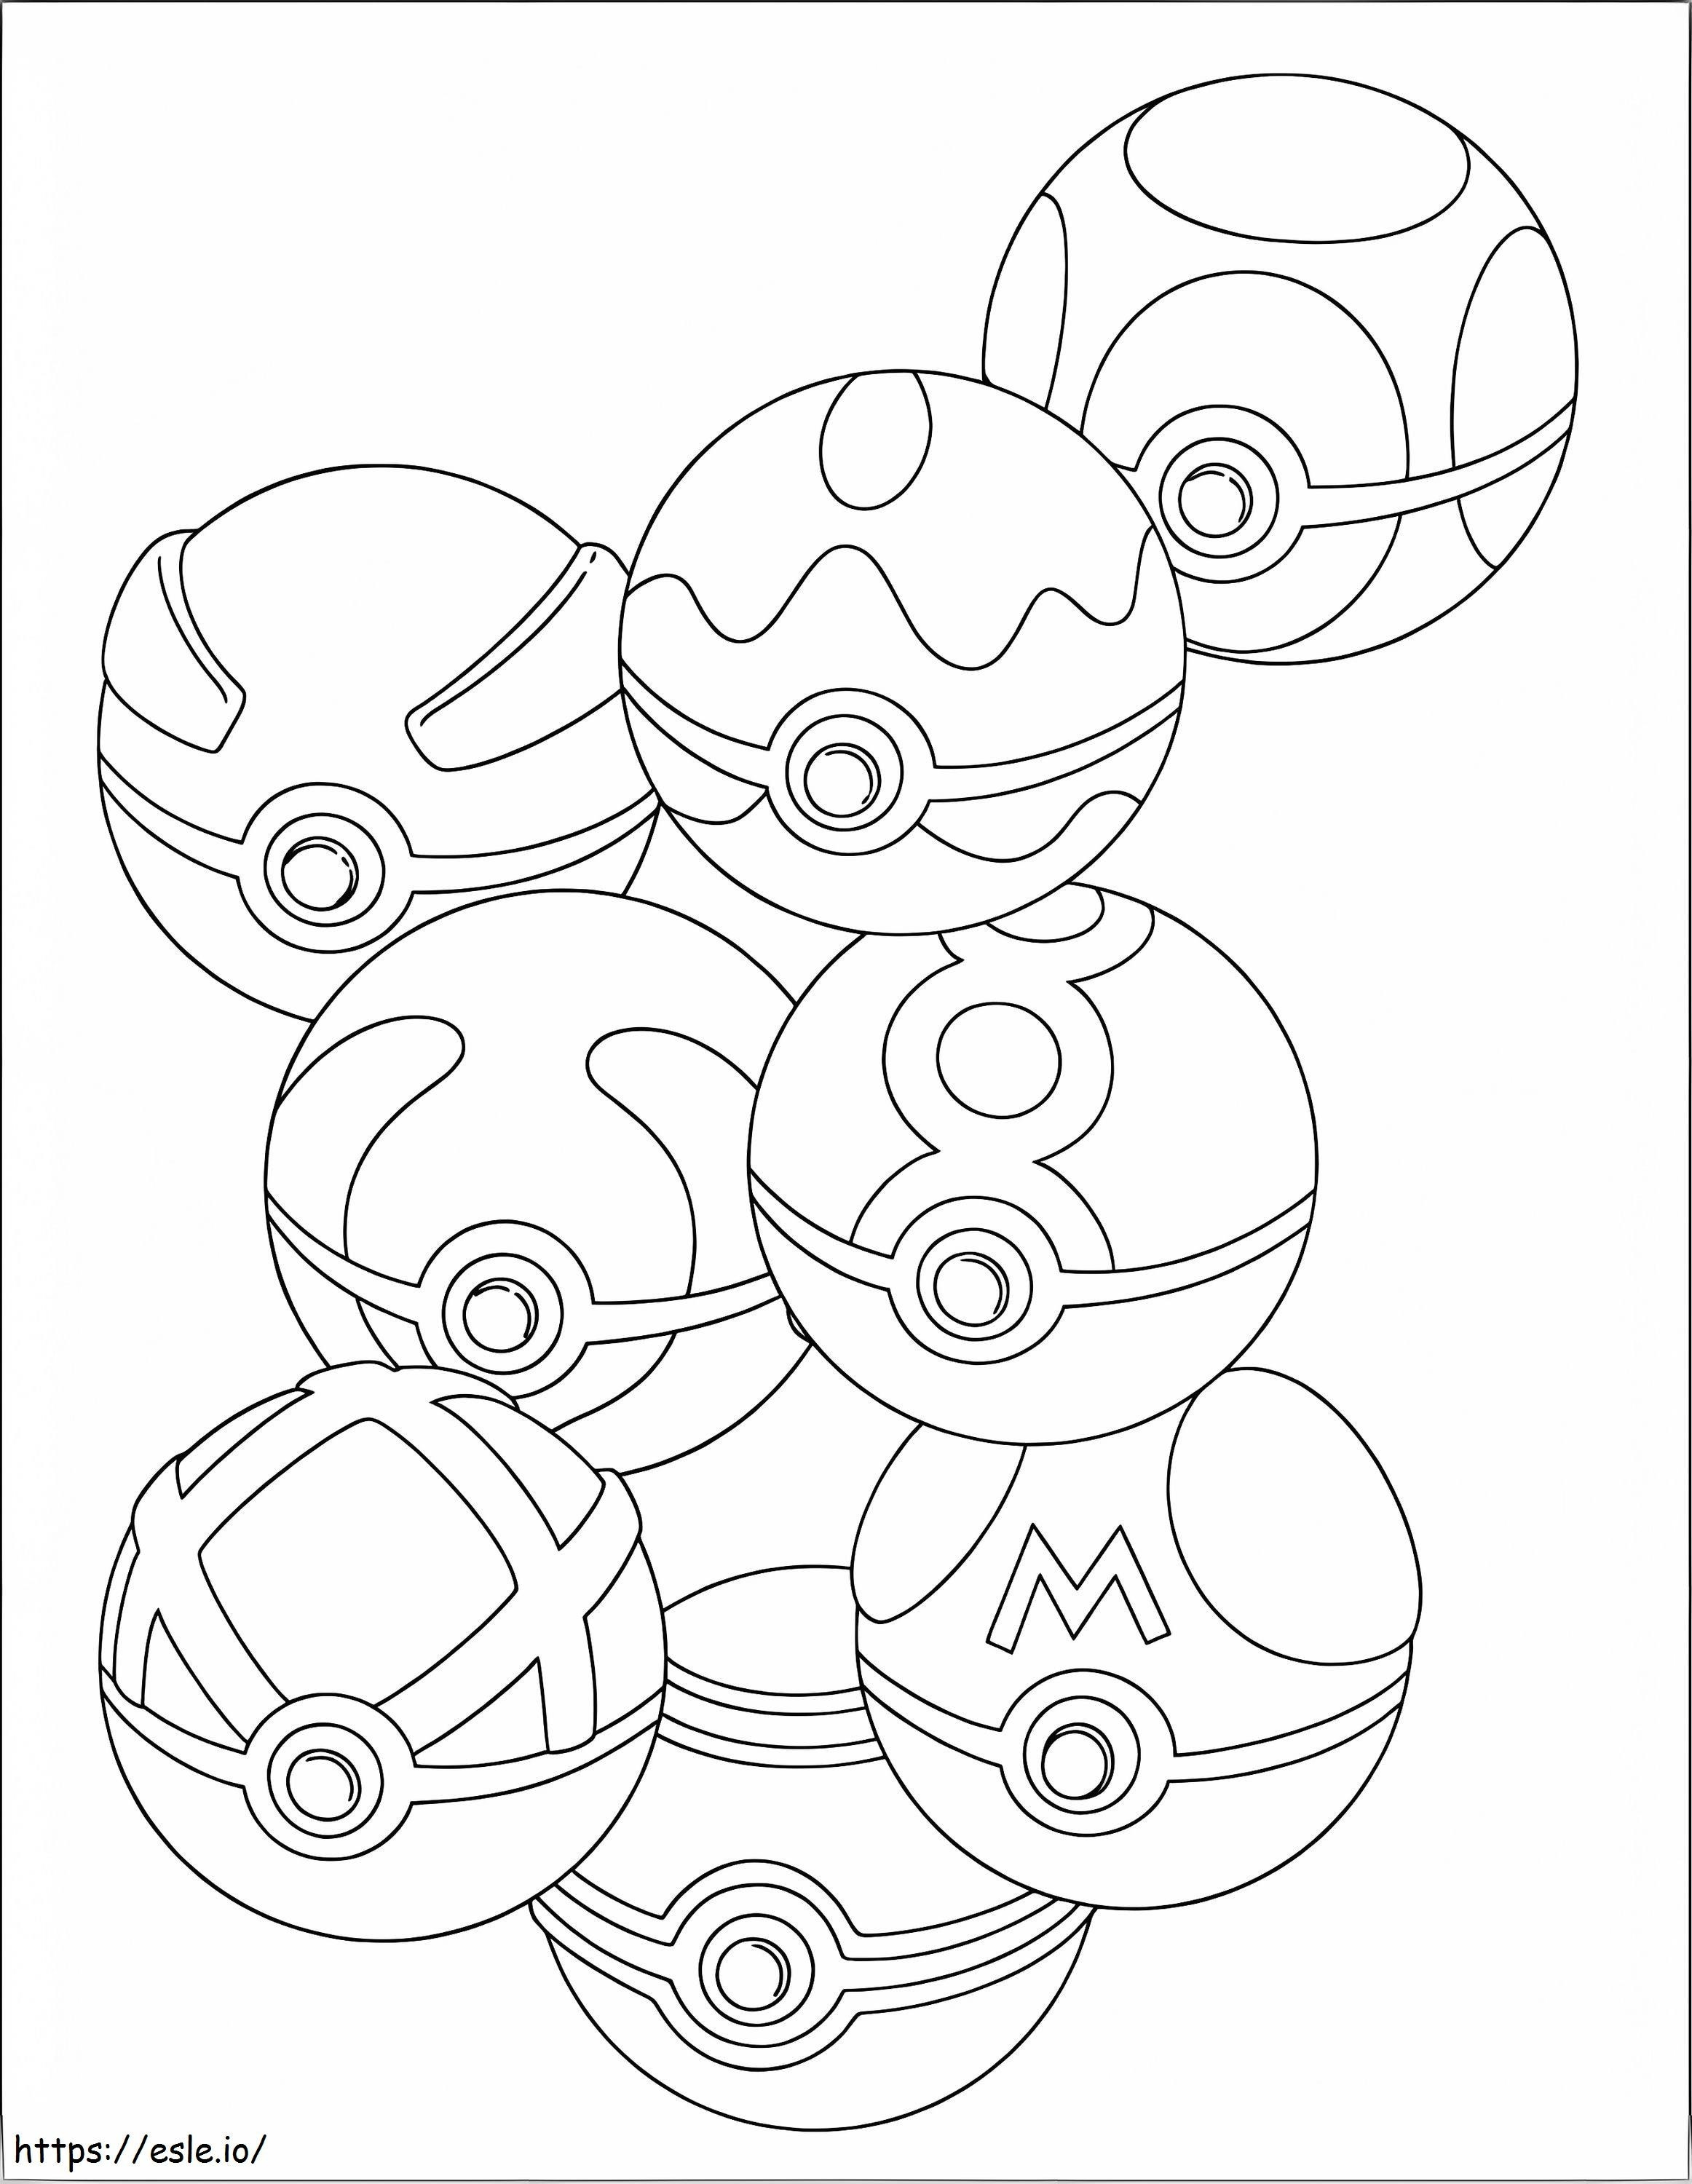 Eight Pokeballs coloring page